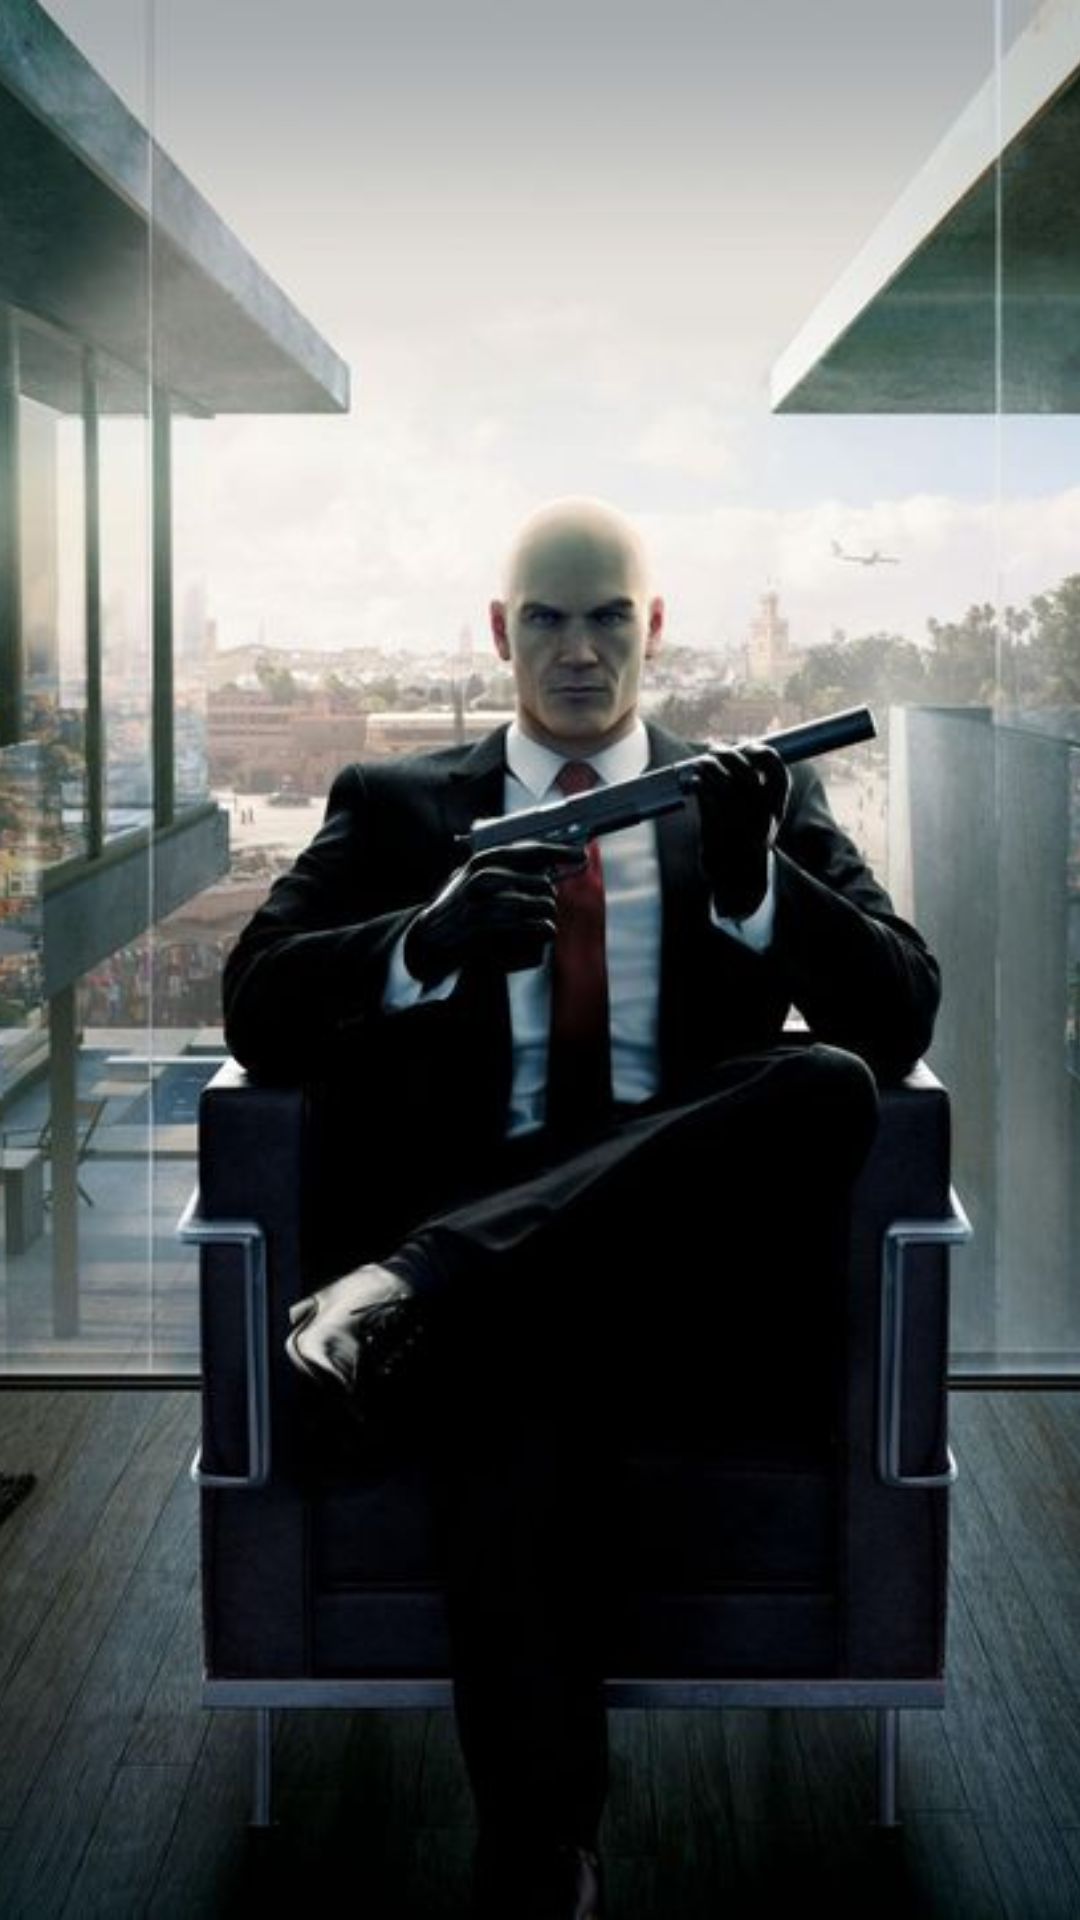 Hitman Absolution Android Wallpaper